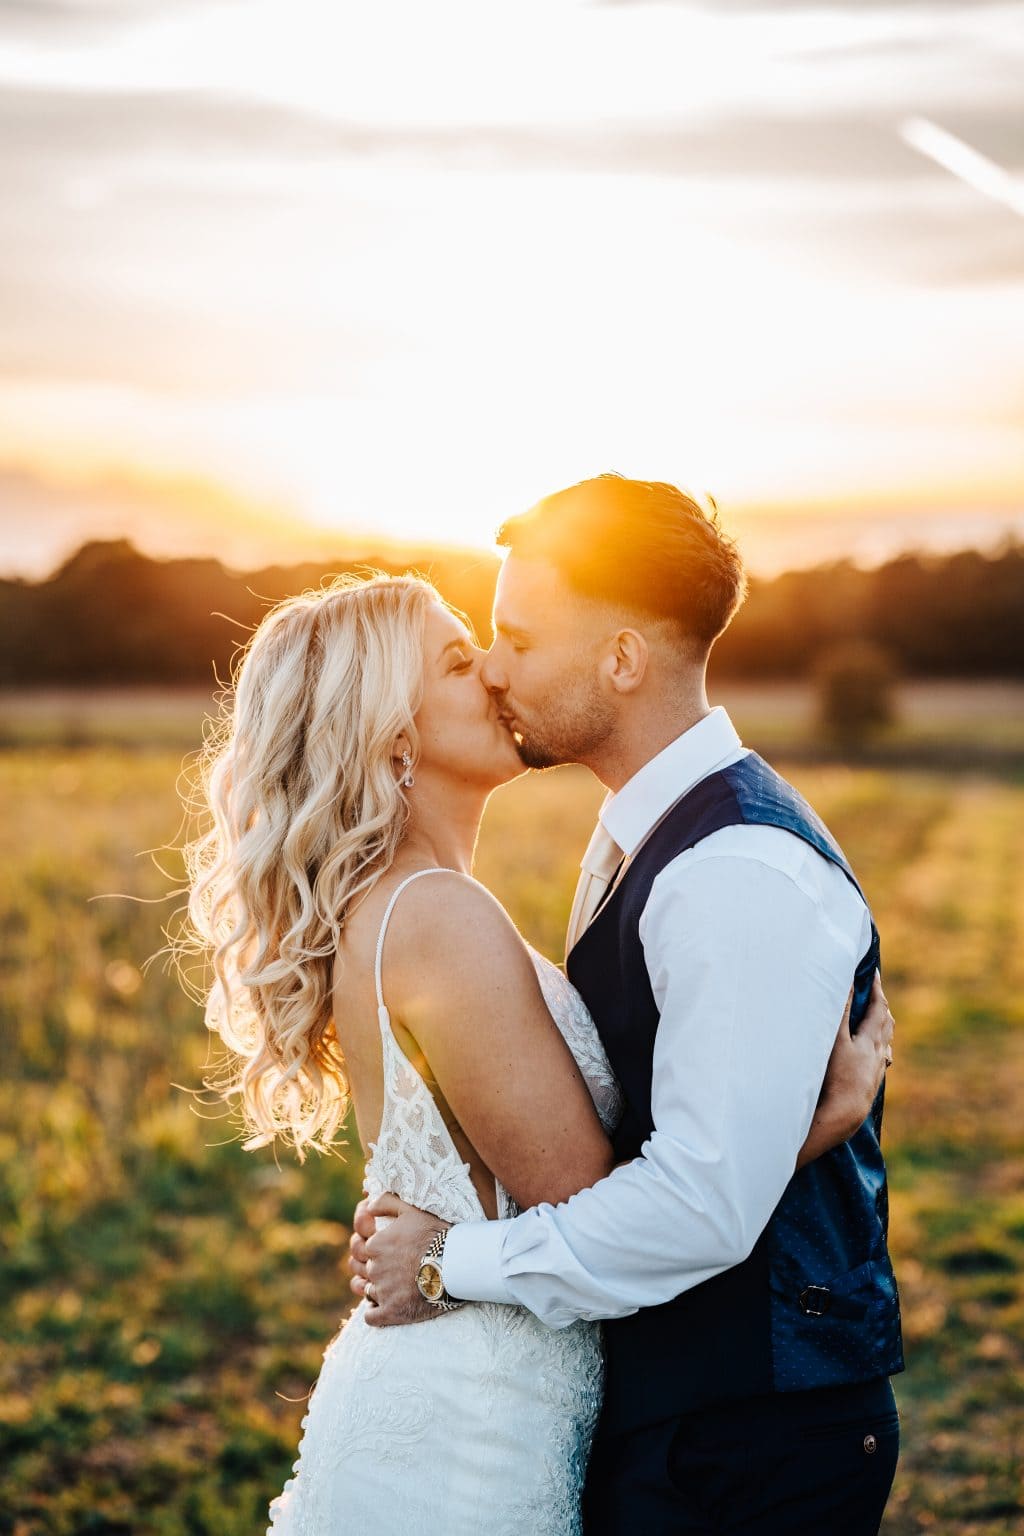 Magnificent sunset kisses for this newlywed couple at Cirencester Wedding Venue Old Gore by Yard Space